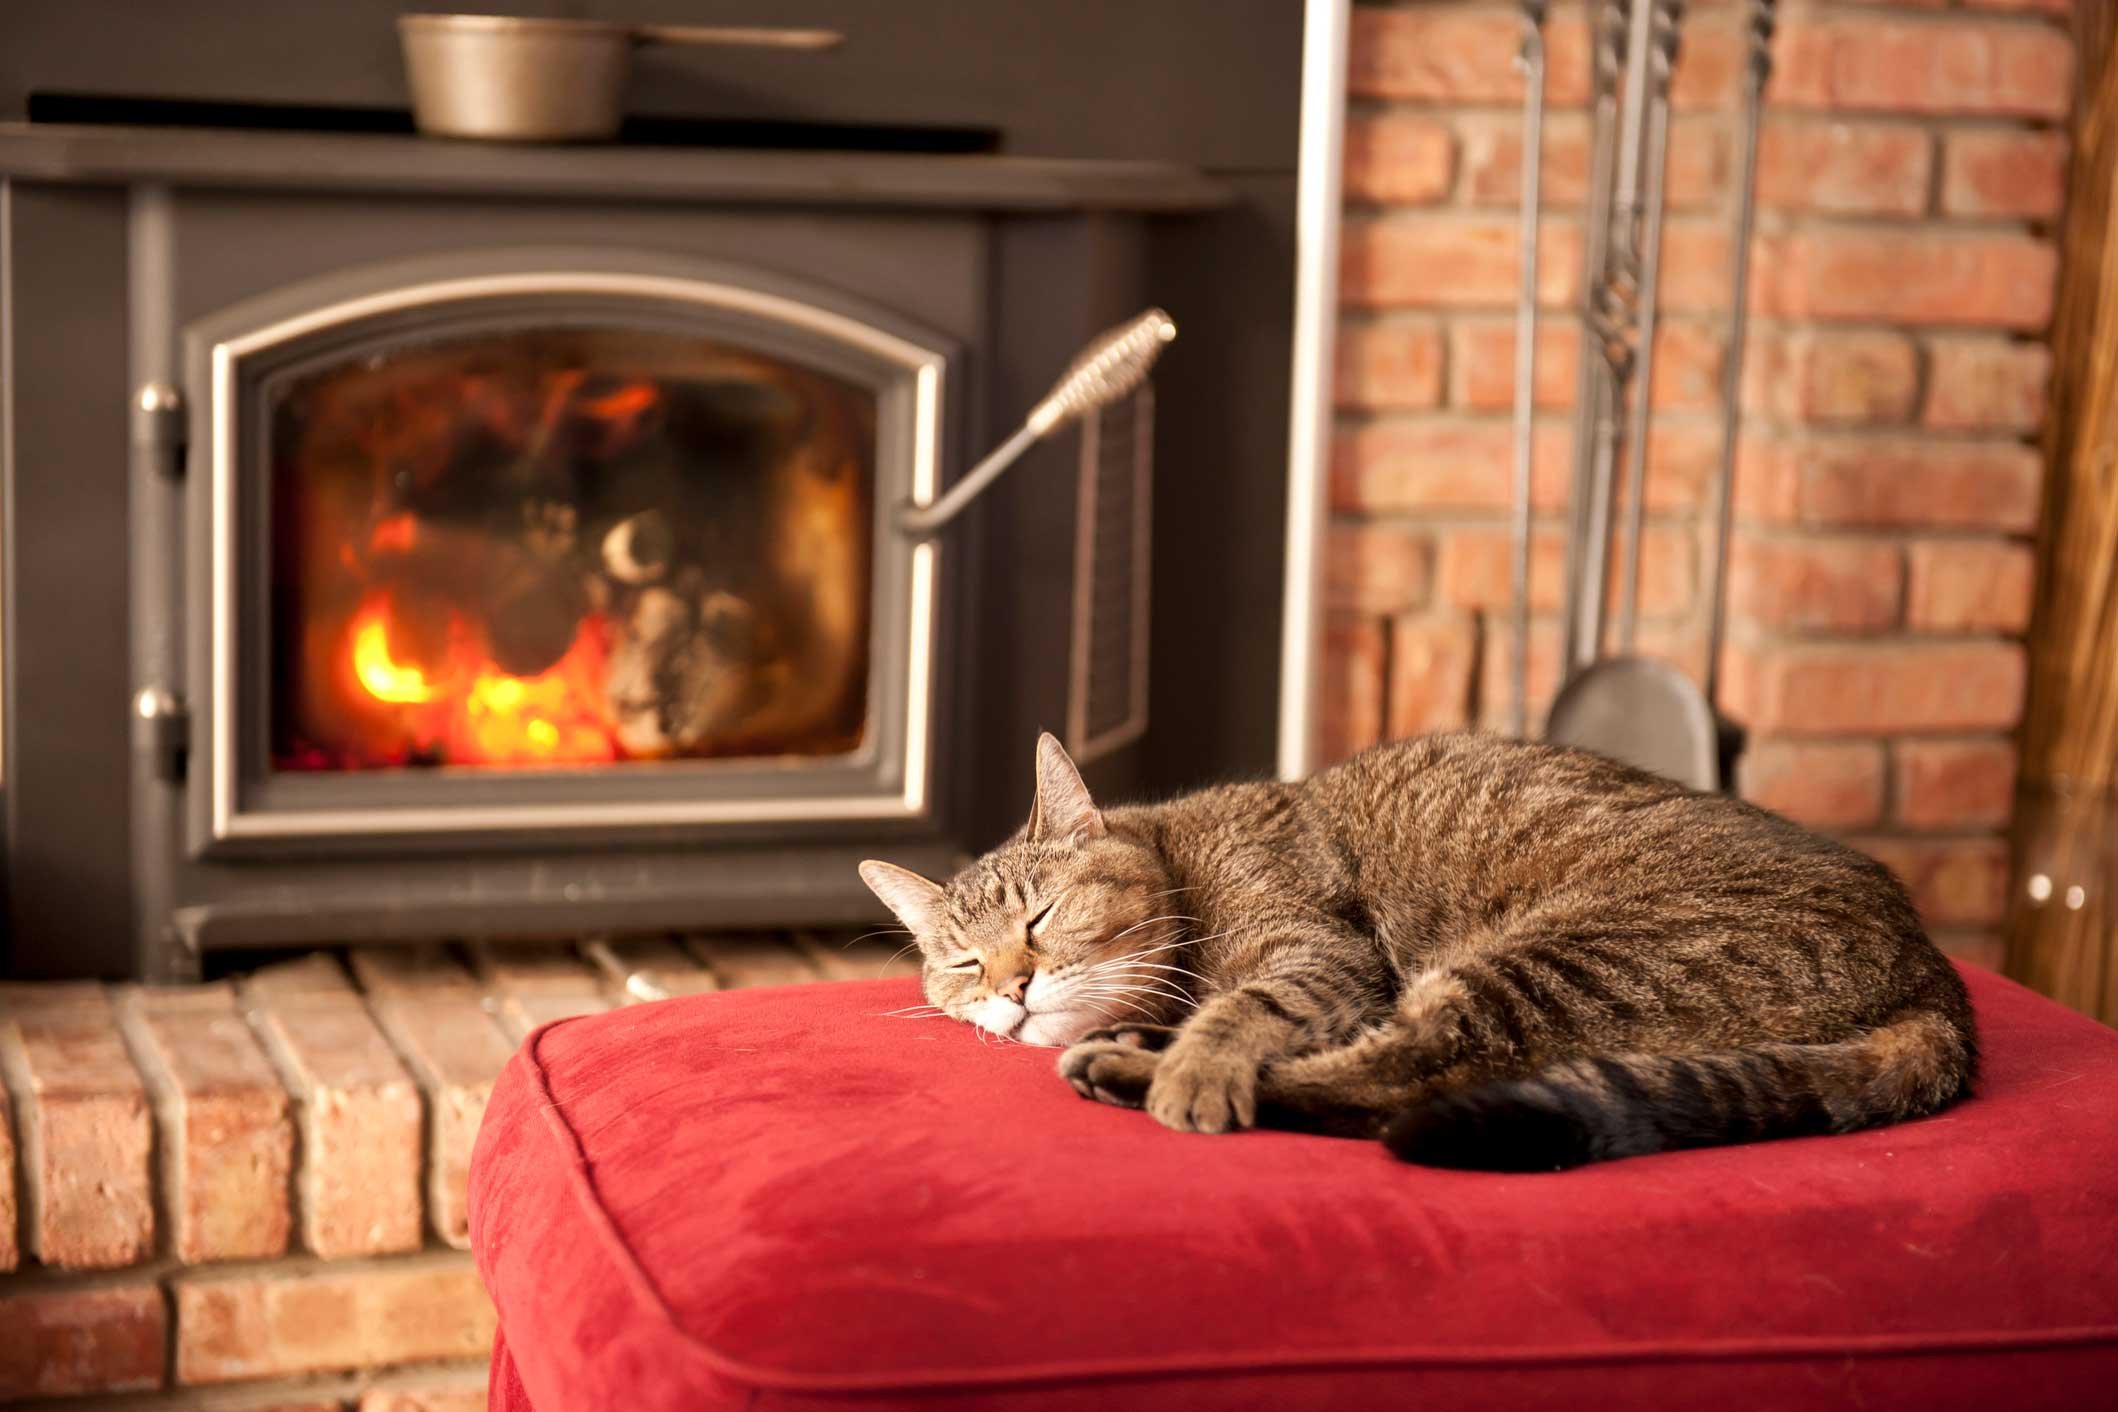 Time to Get Cozy!